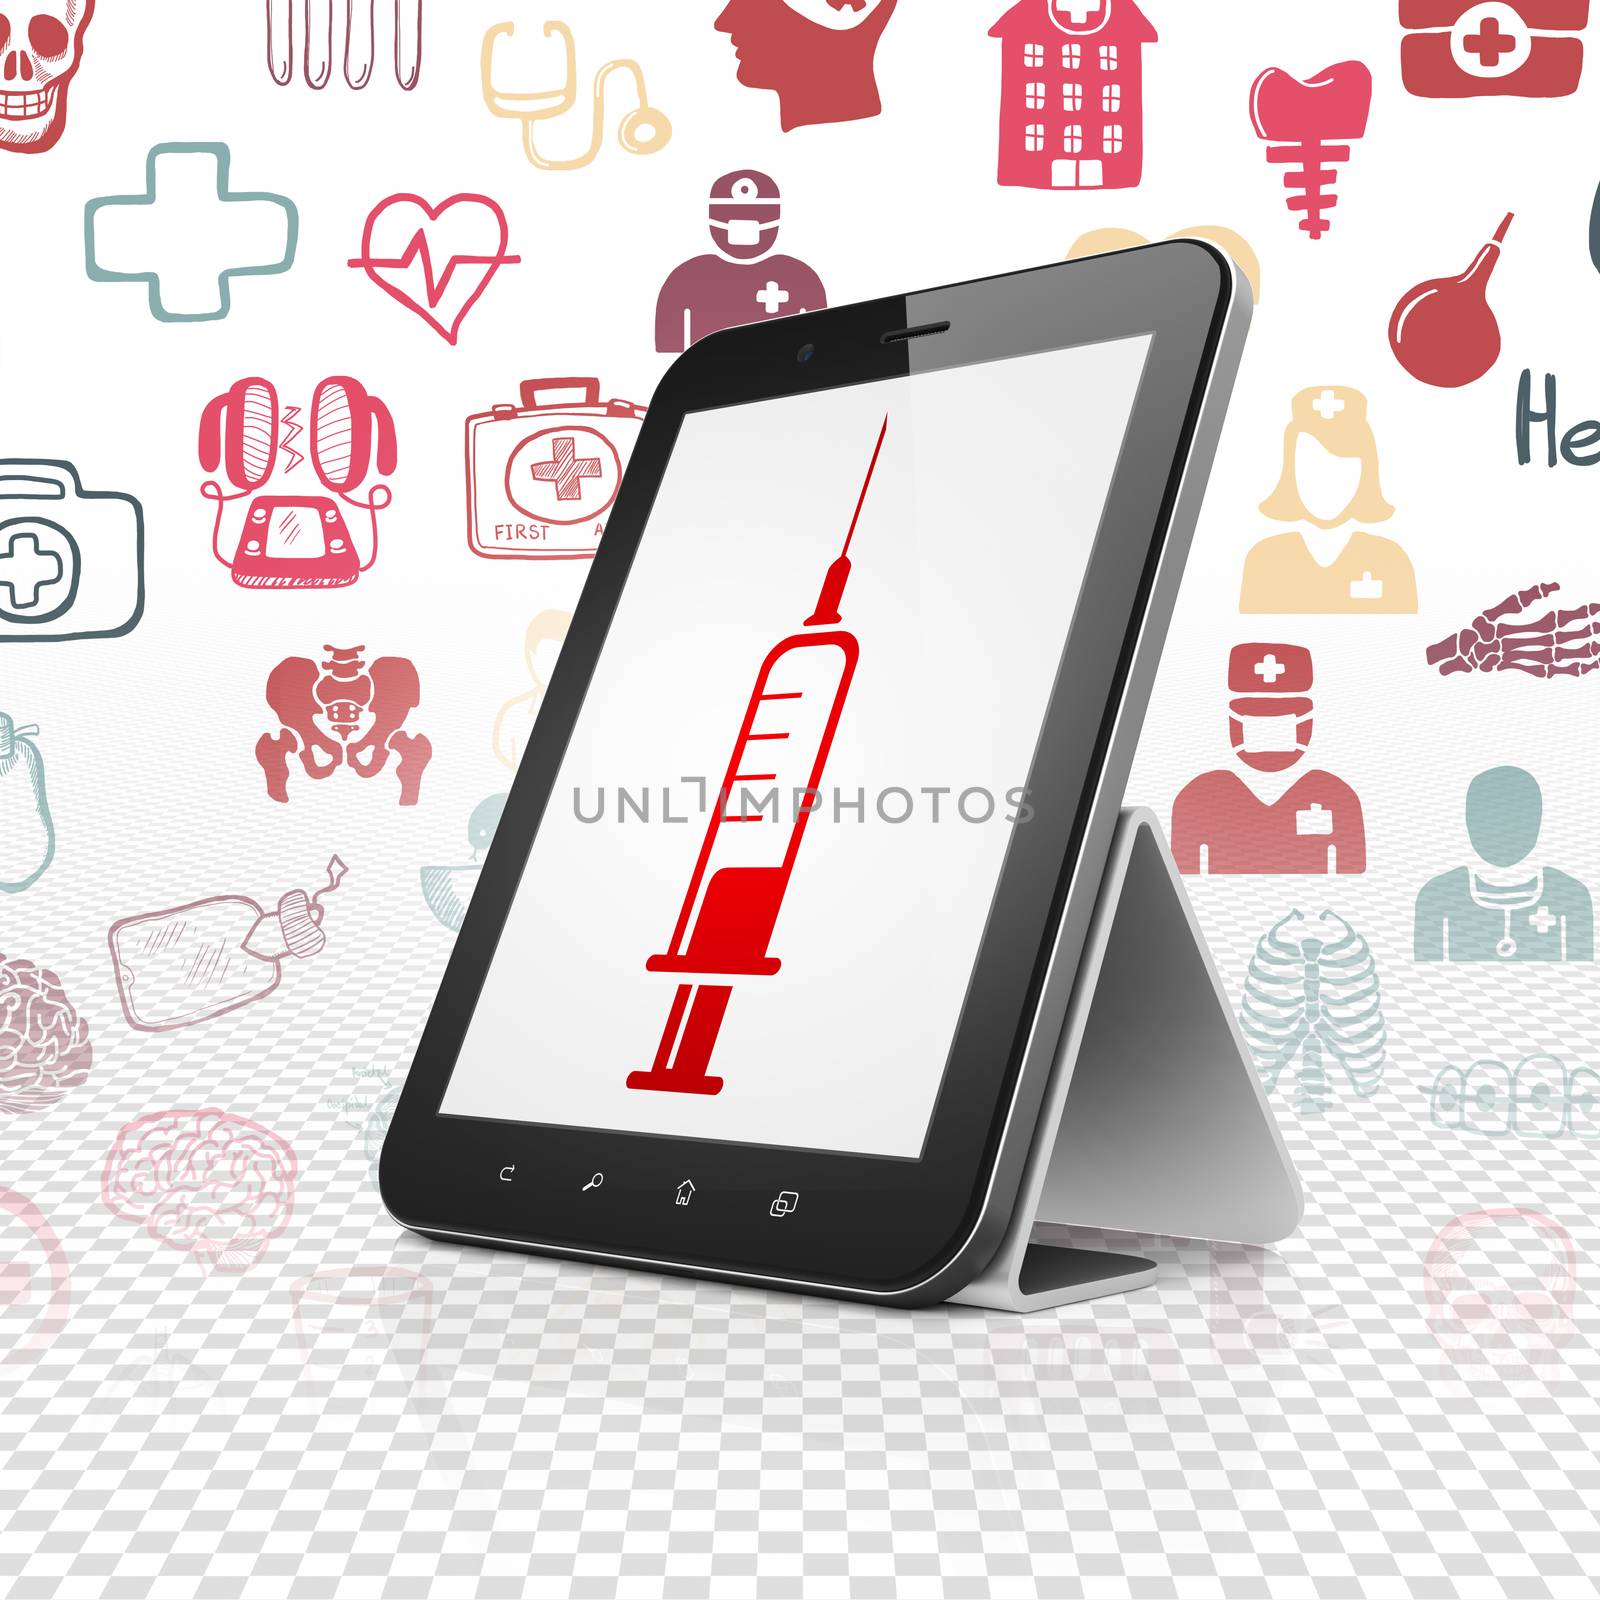 Medicine concept: Tablet Computer with  red Syringe icon on display,  Hand Drawn Medicine Icons background, 3D rendering